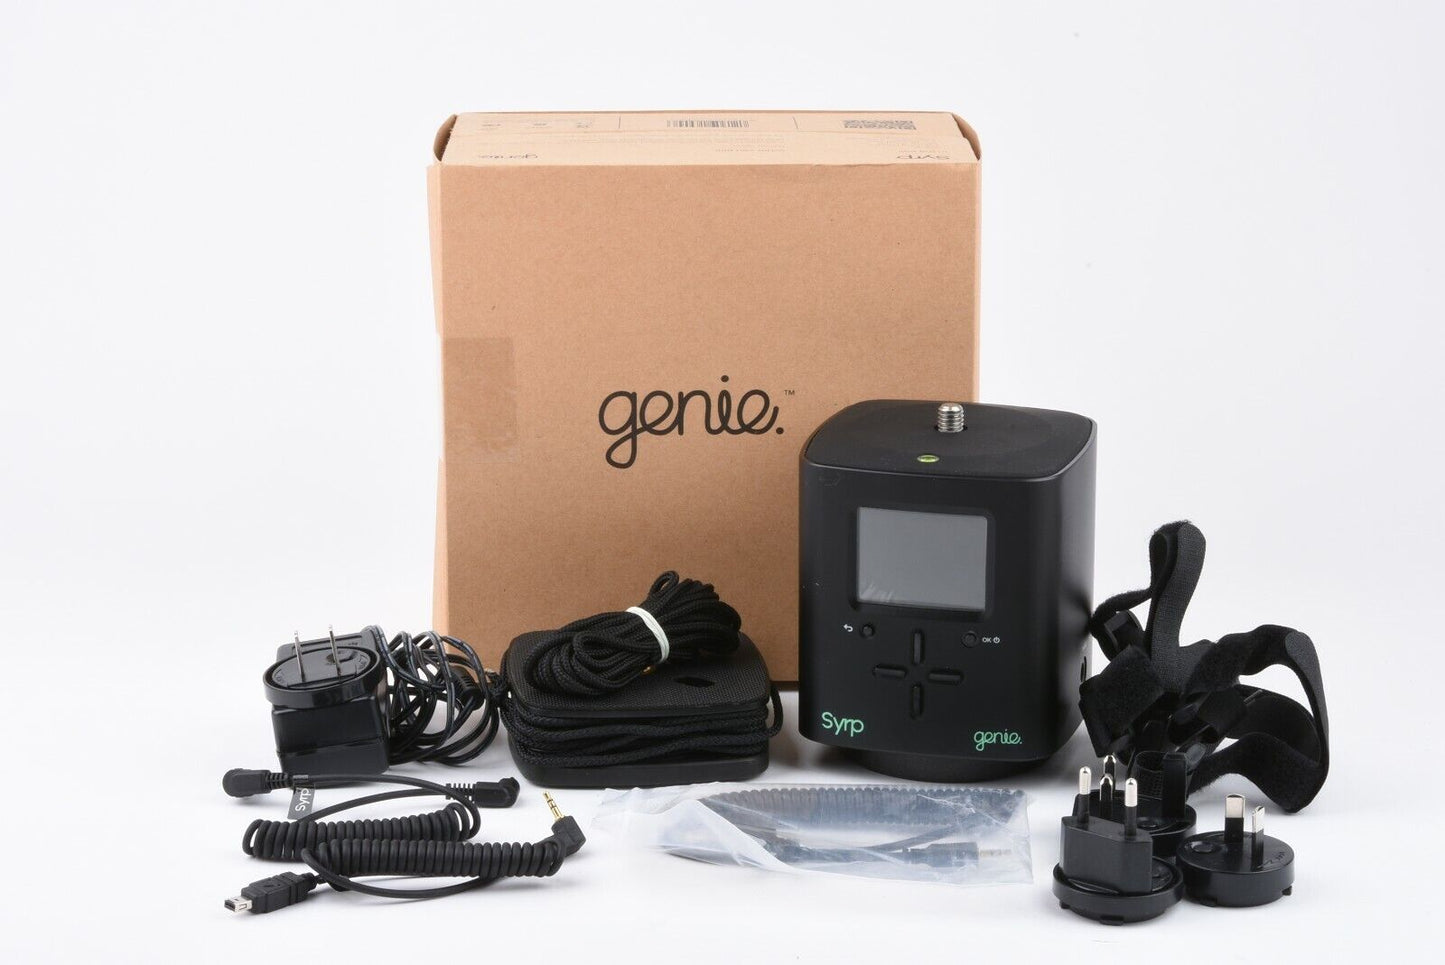 EXC++ BOXED GENIE SYRP MOTION CONTROLLED VIDEO HEAD, COMPLETE, GENTLY USED